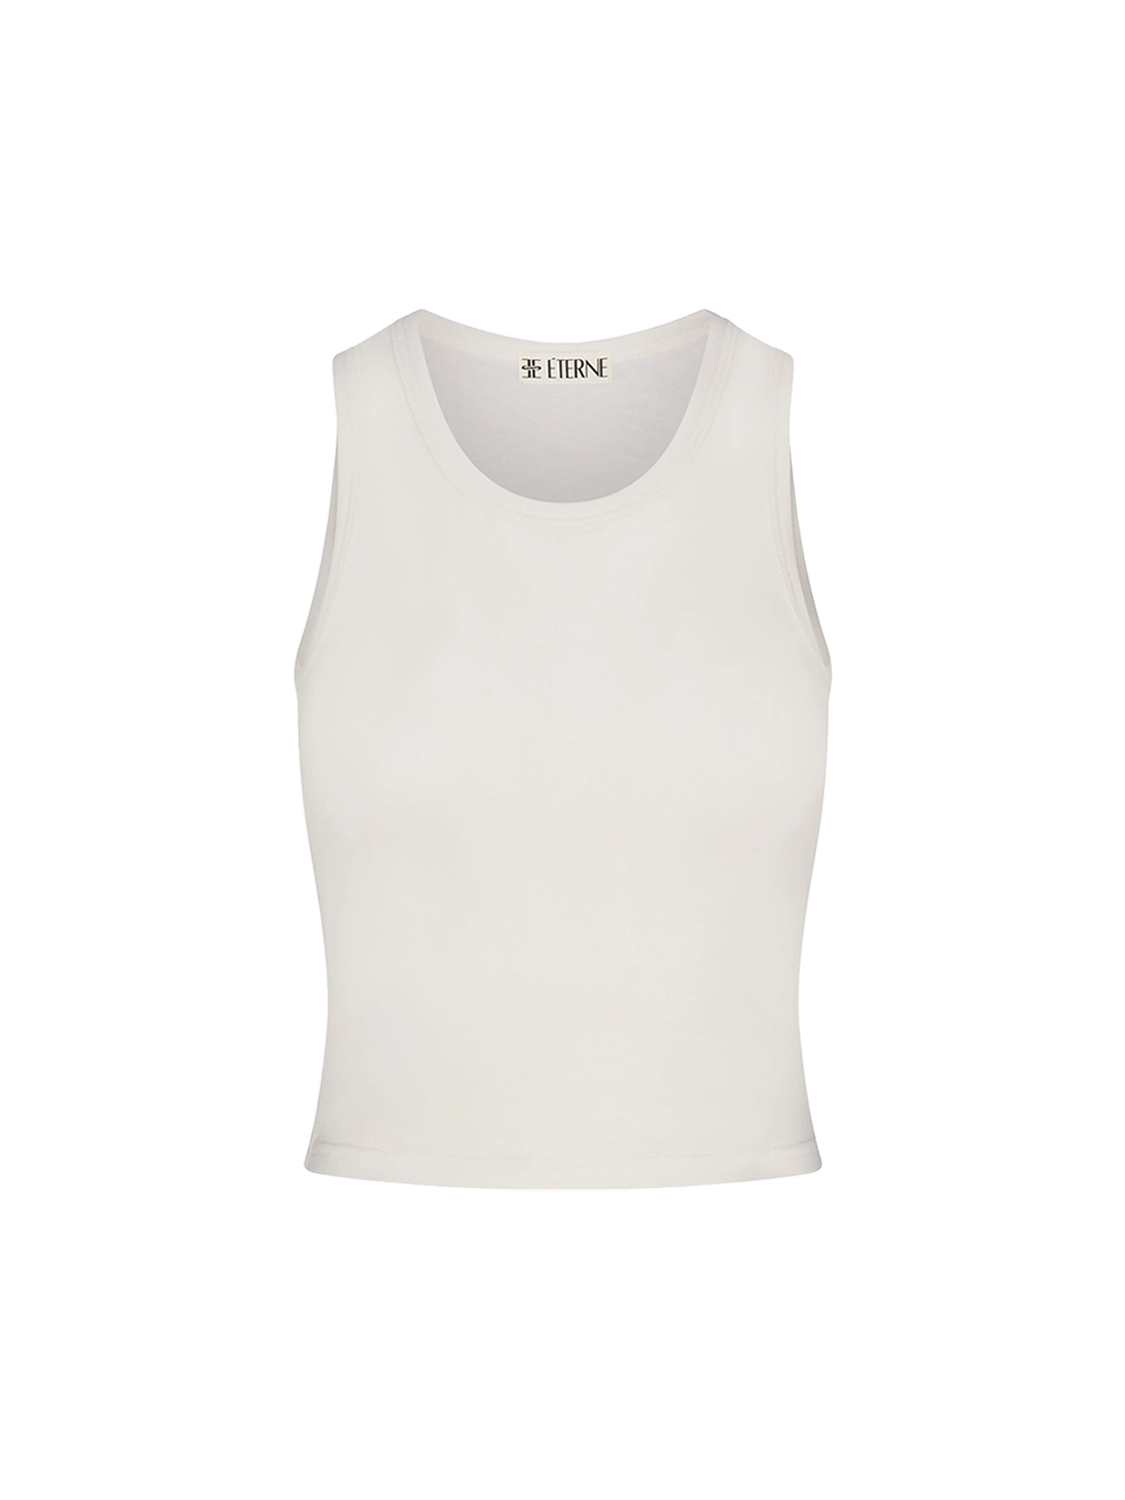 Fitted tank – fitted Shirt made of cotton and modal mix 